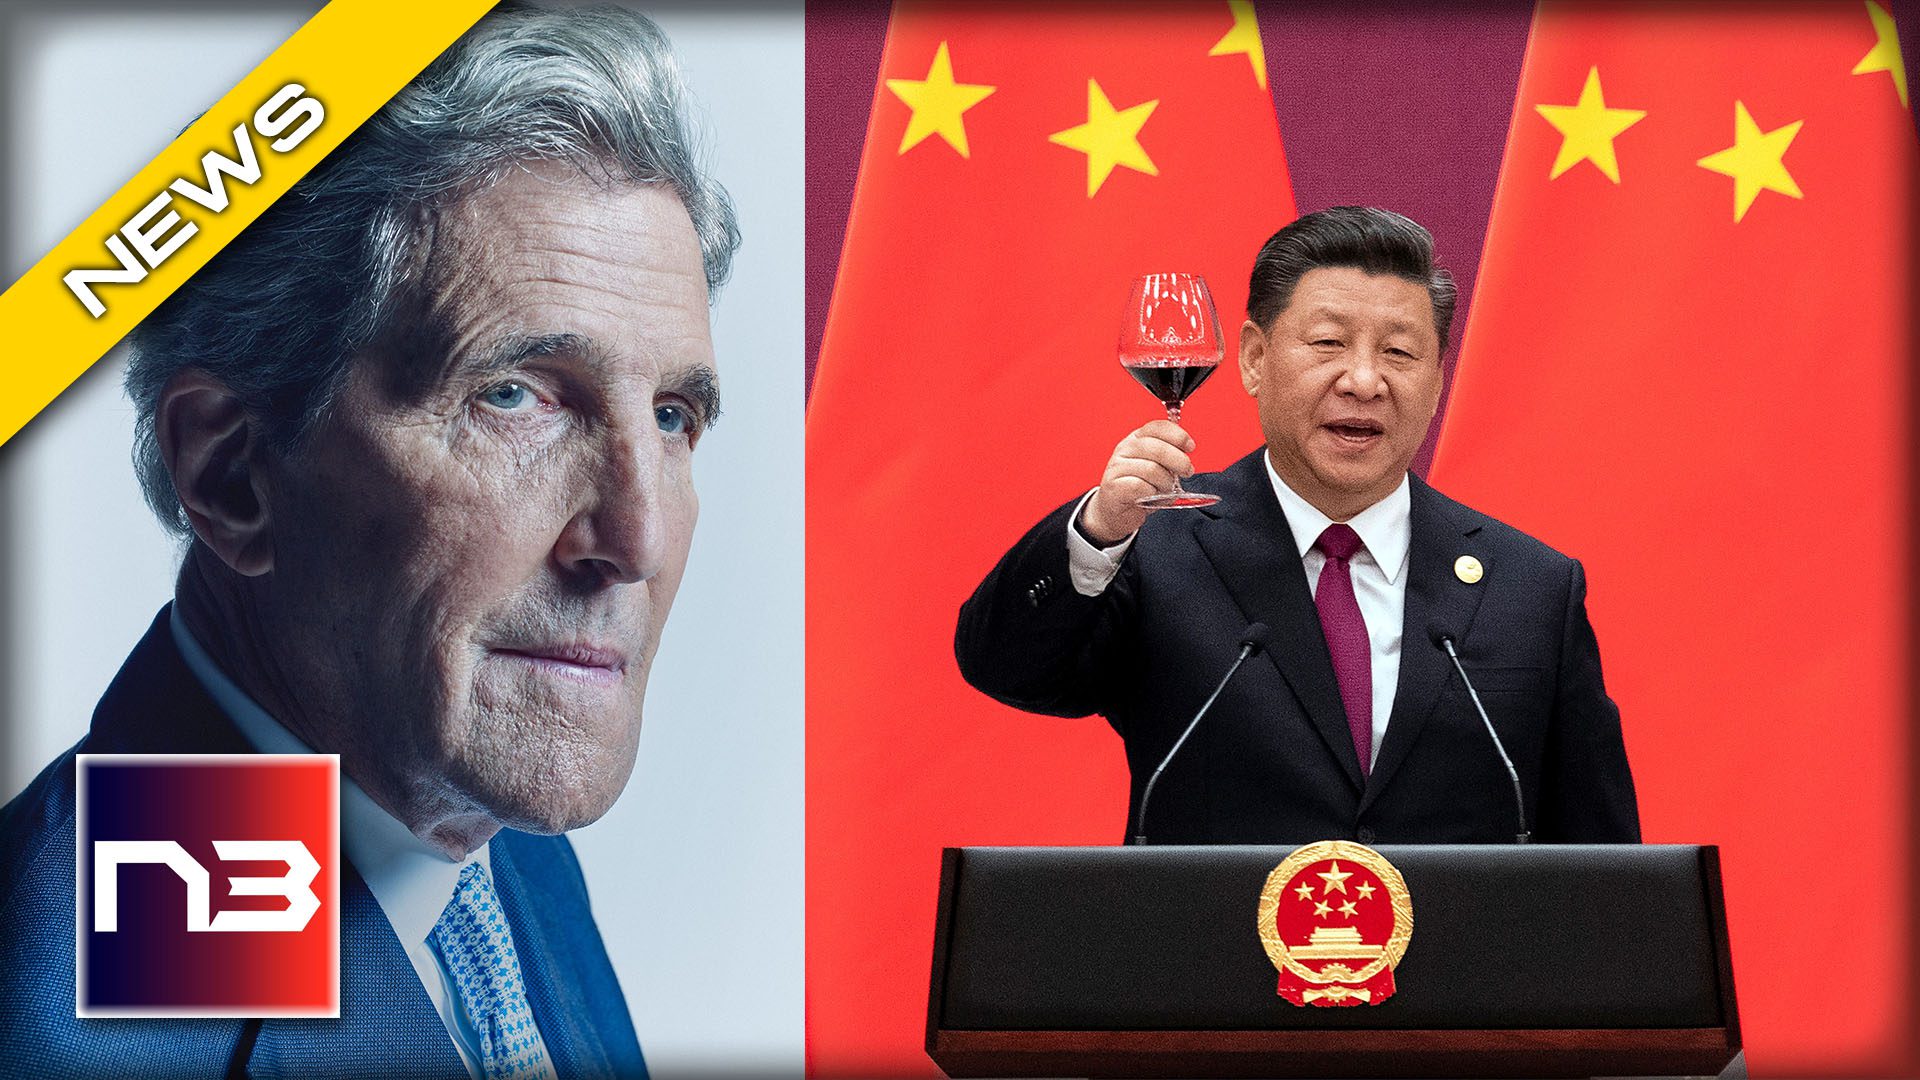 GOT NUKES? Biden Warns of Nuclear Threat So John Kerry Runs To China to Chat About Climate Instead